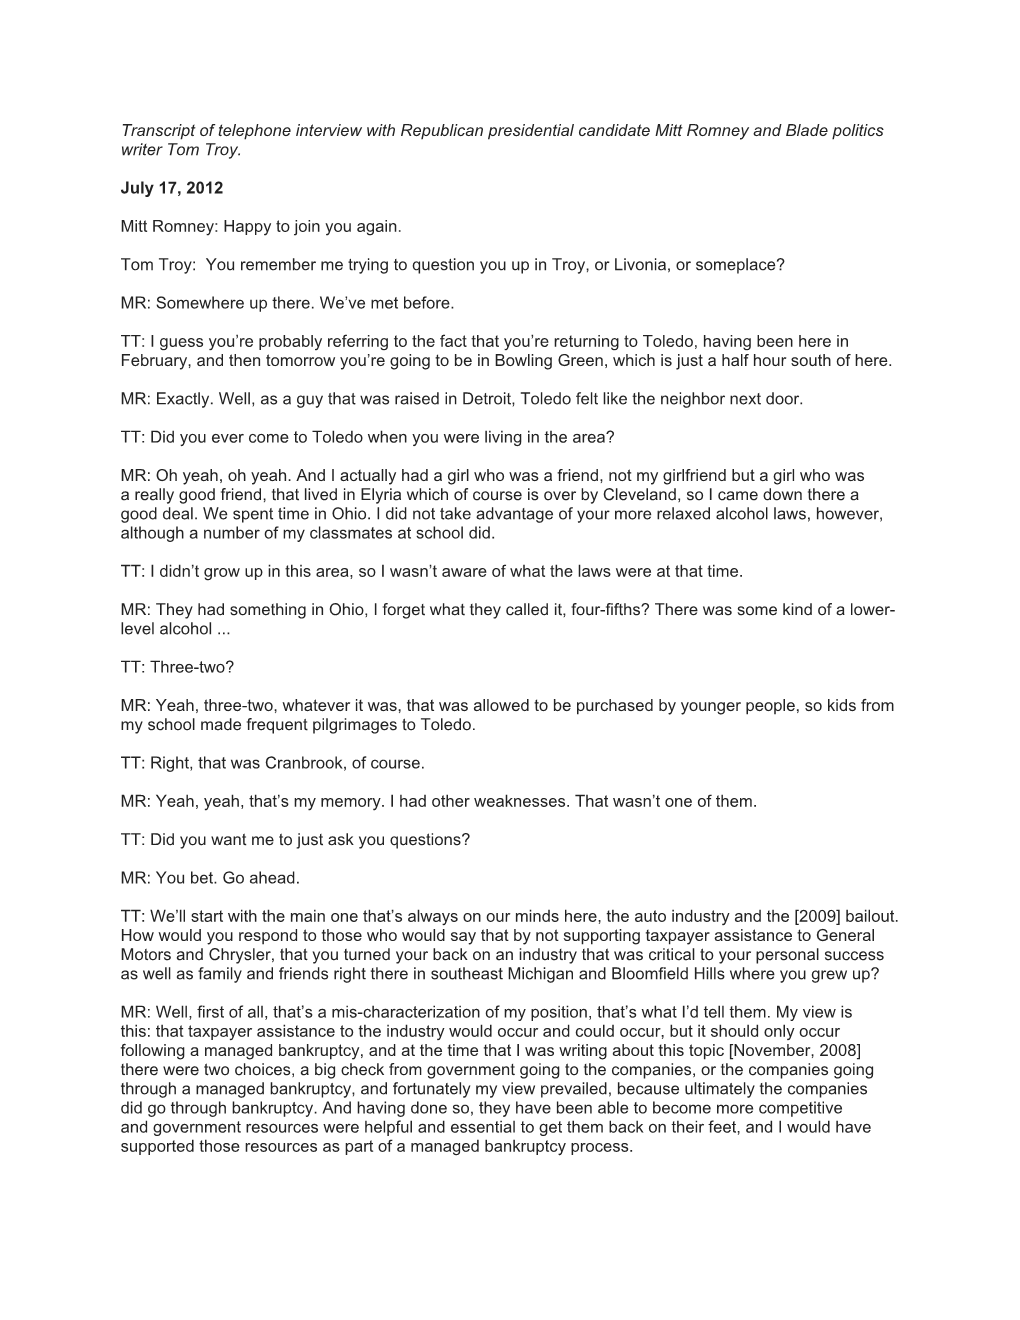 Transcript of Telephone Interview with Republican Presidential Candidate Mitt Romney and Blade Politics Writer Tom Troy